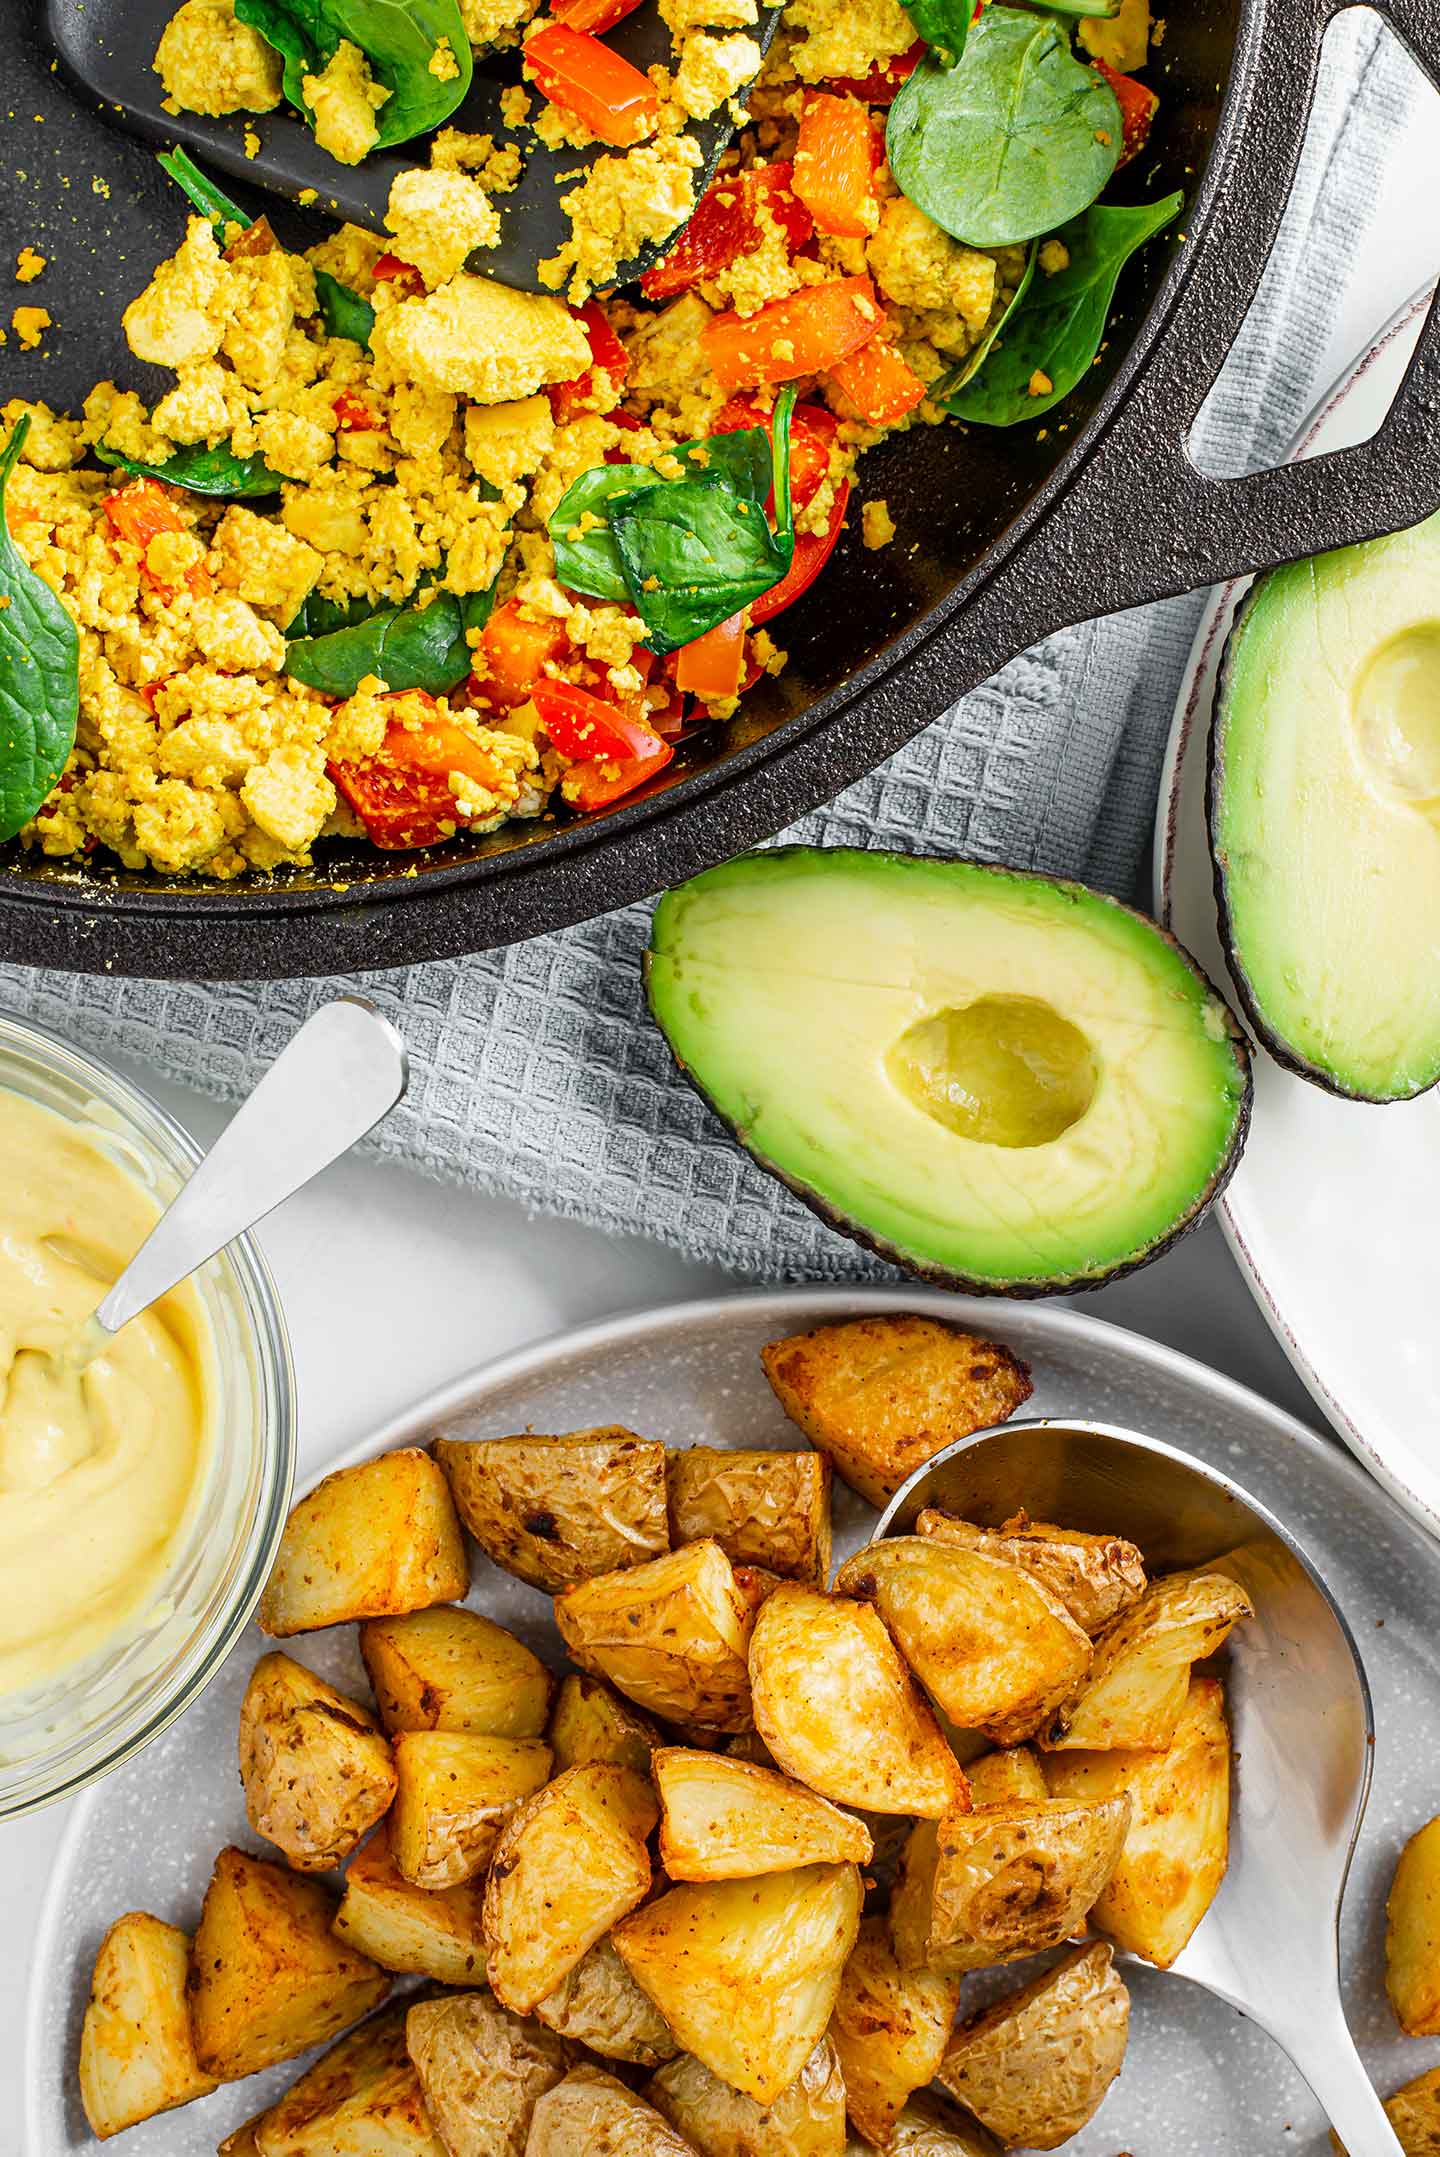 Top down view of roasted potatoes in a bowl, tofu scramble in a cast-iron skillet, avocado halved, and cheesy queso in a small glass dish.